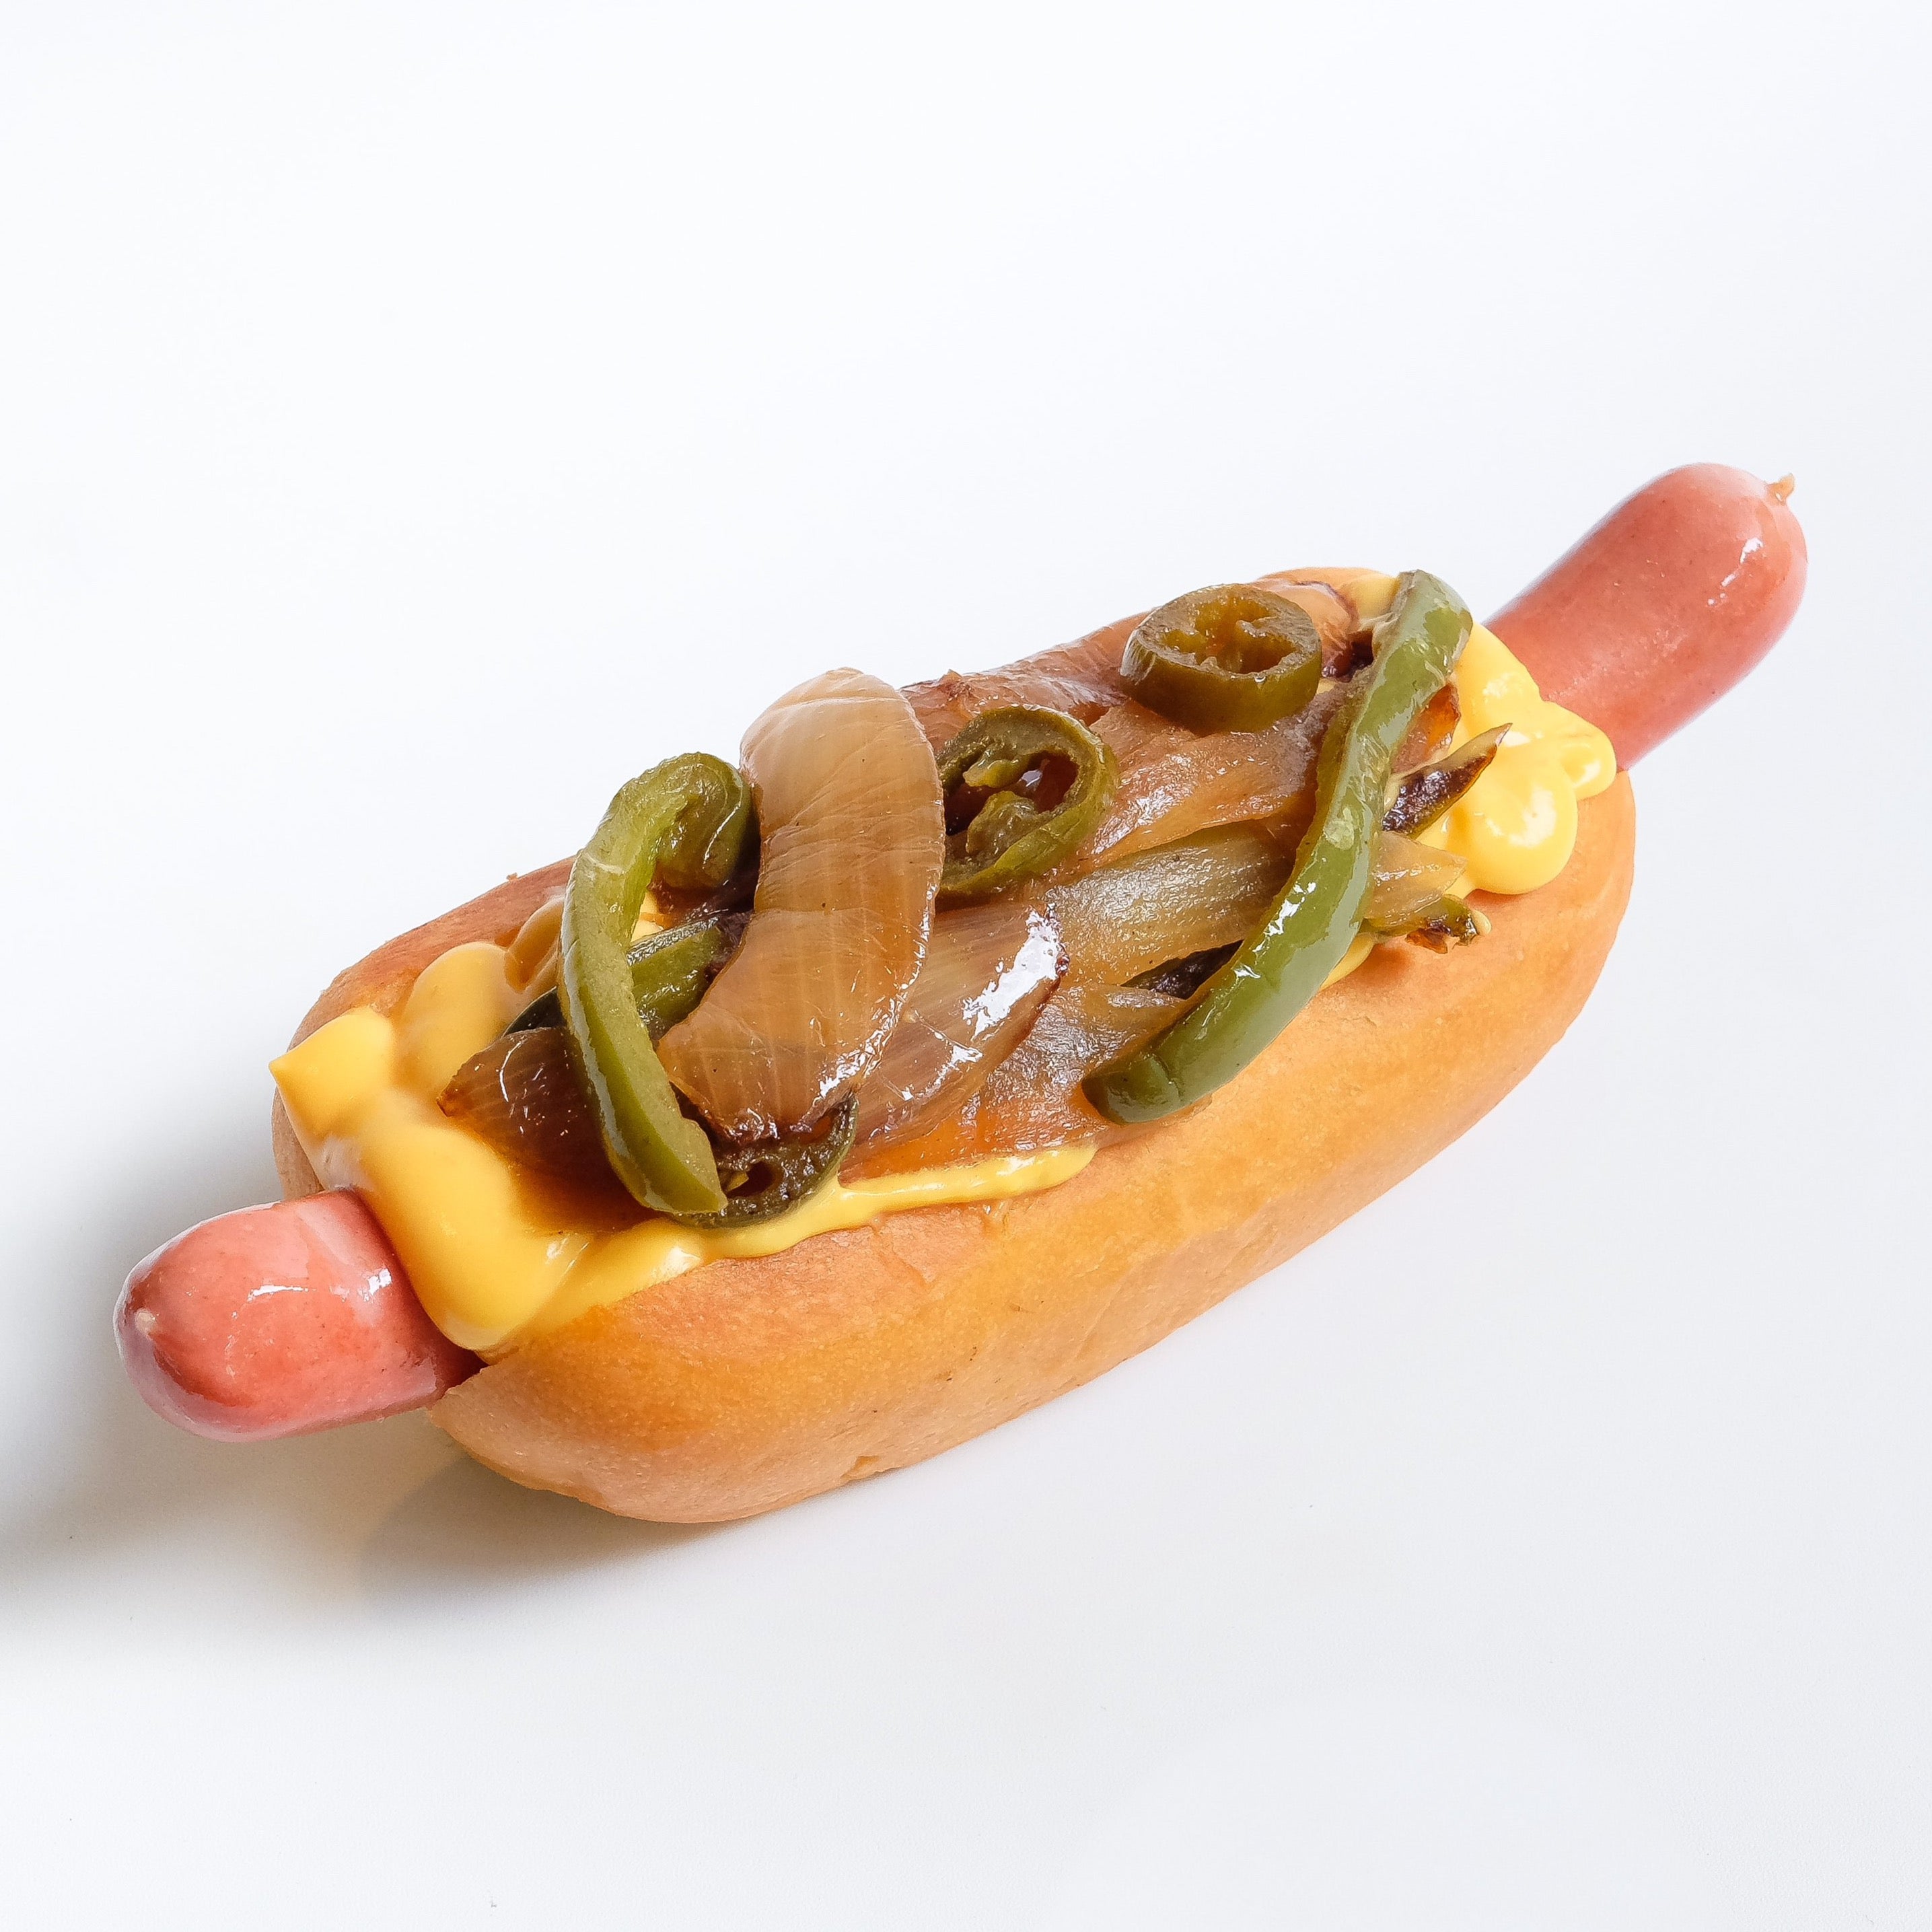 Philly Cheese Dog